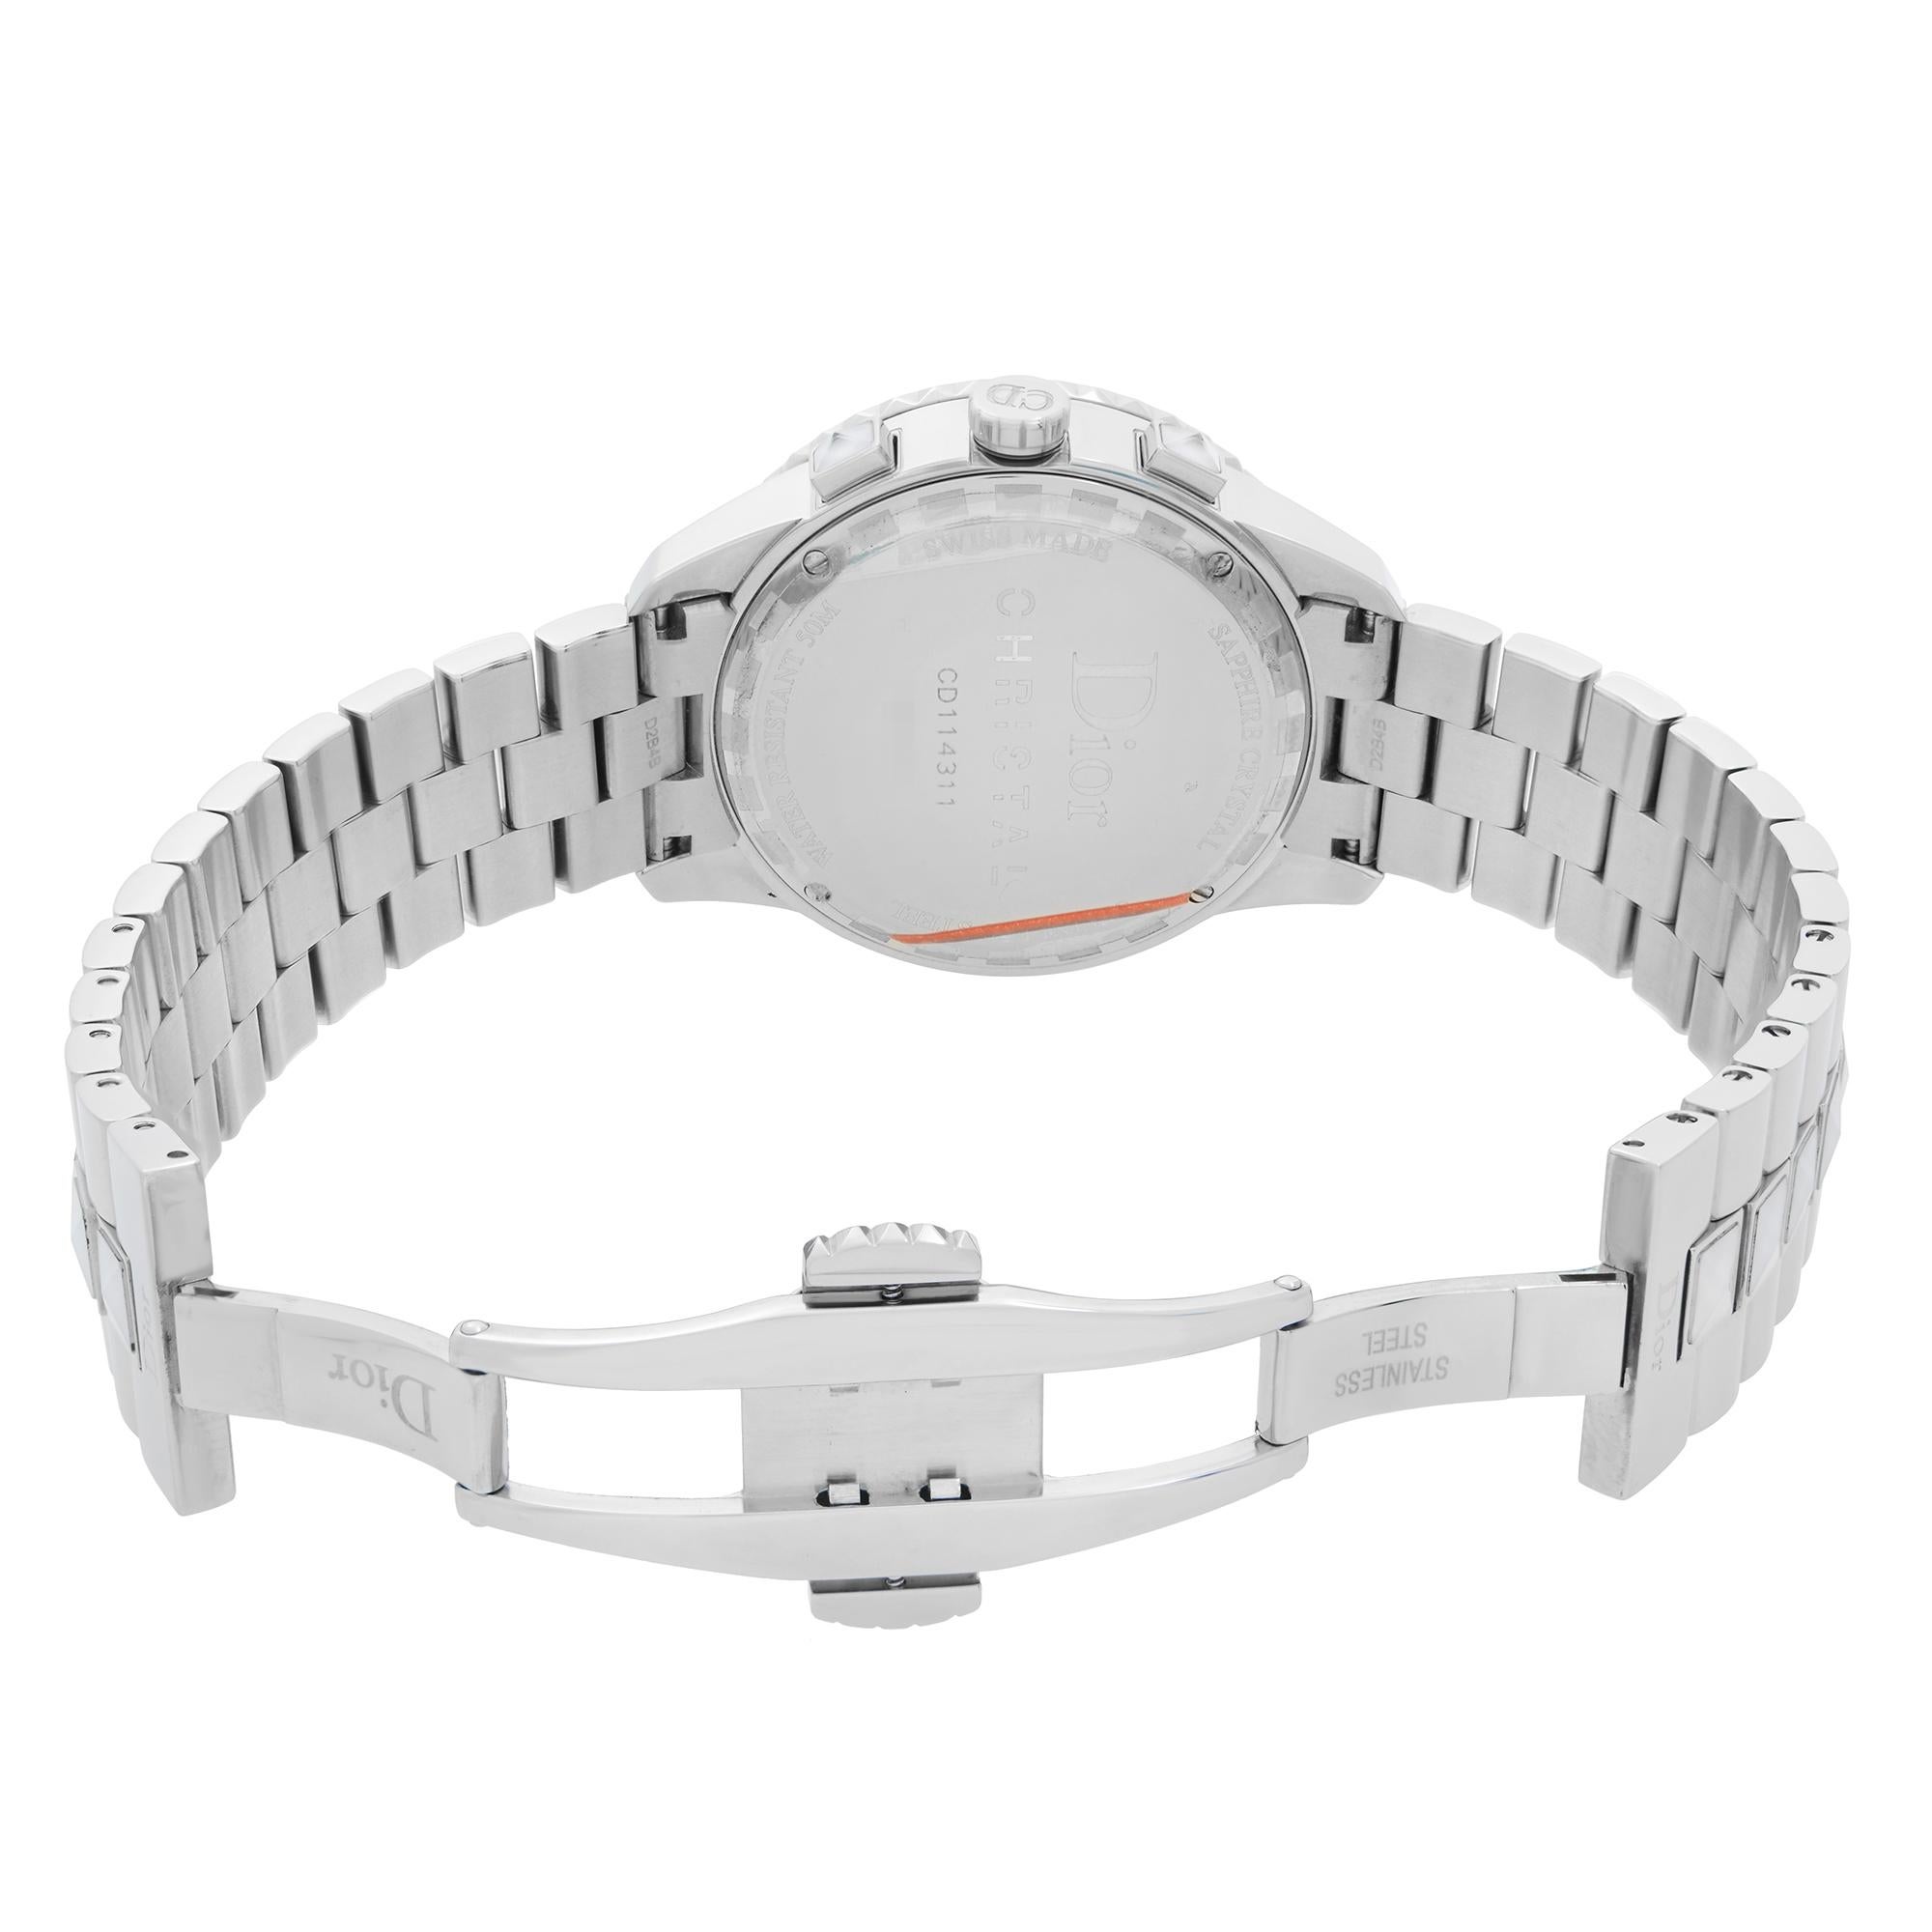 Dior Christal Stainless Steel Diamond White Dial Quartz Watch CD114311M001 In New Condition For Sale In New York, NY